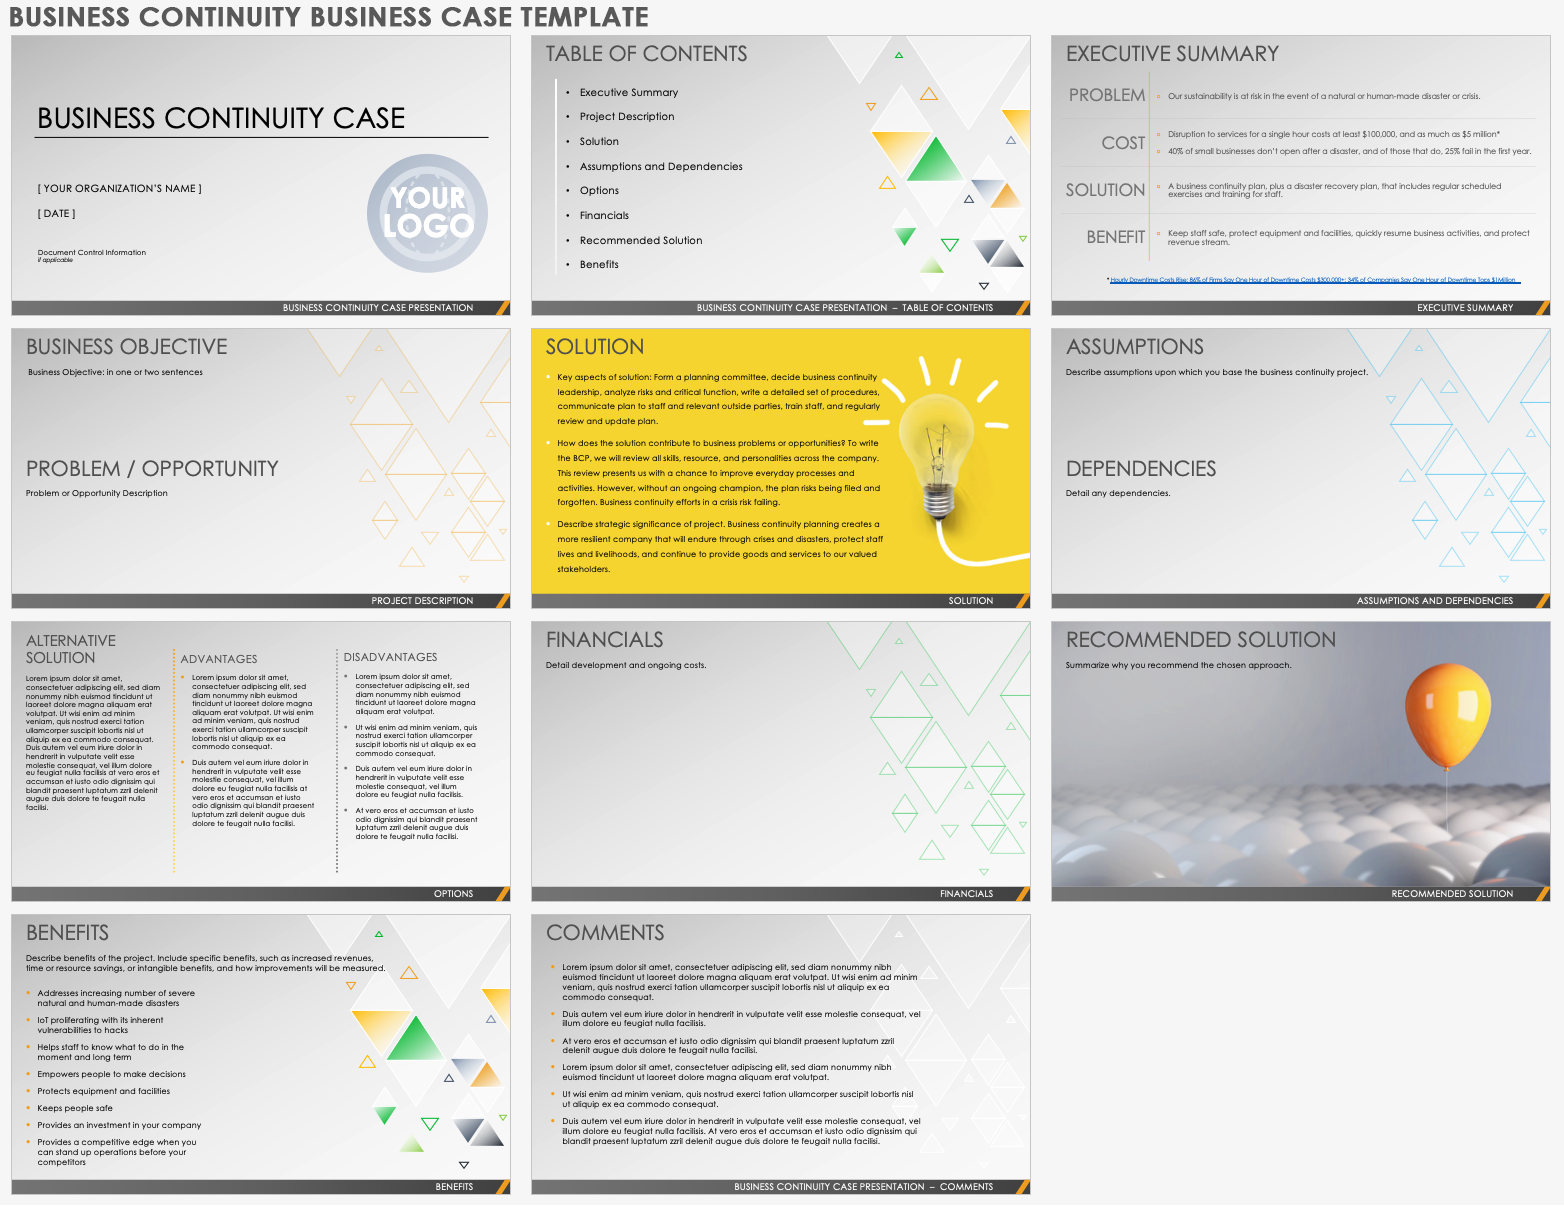 Business Continuity Business Case Template